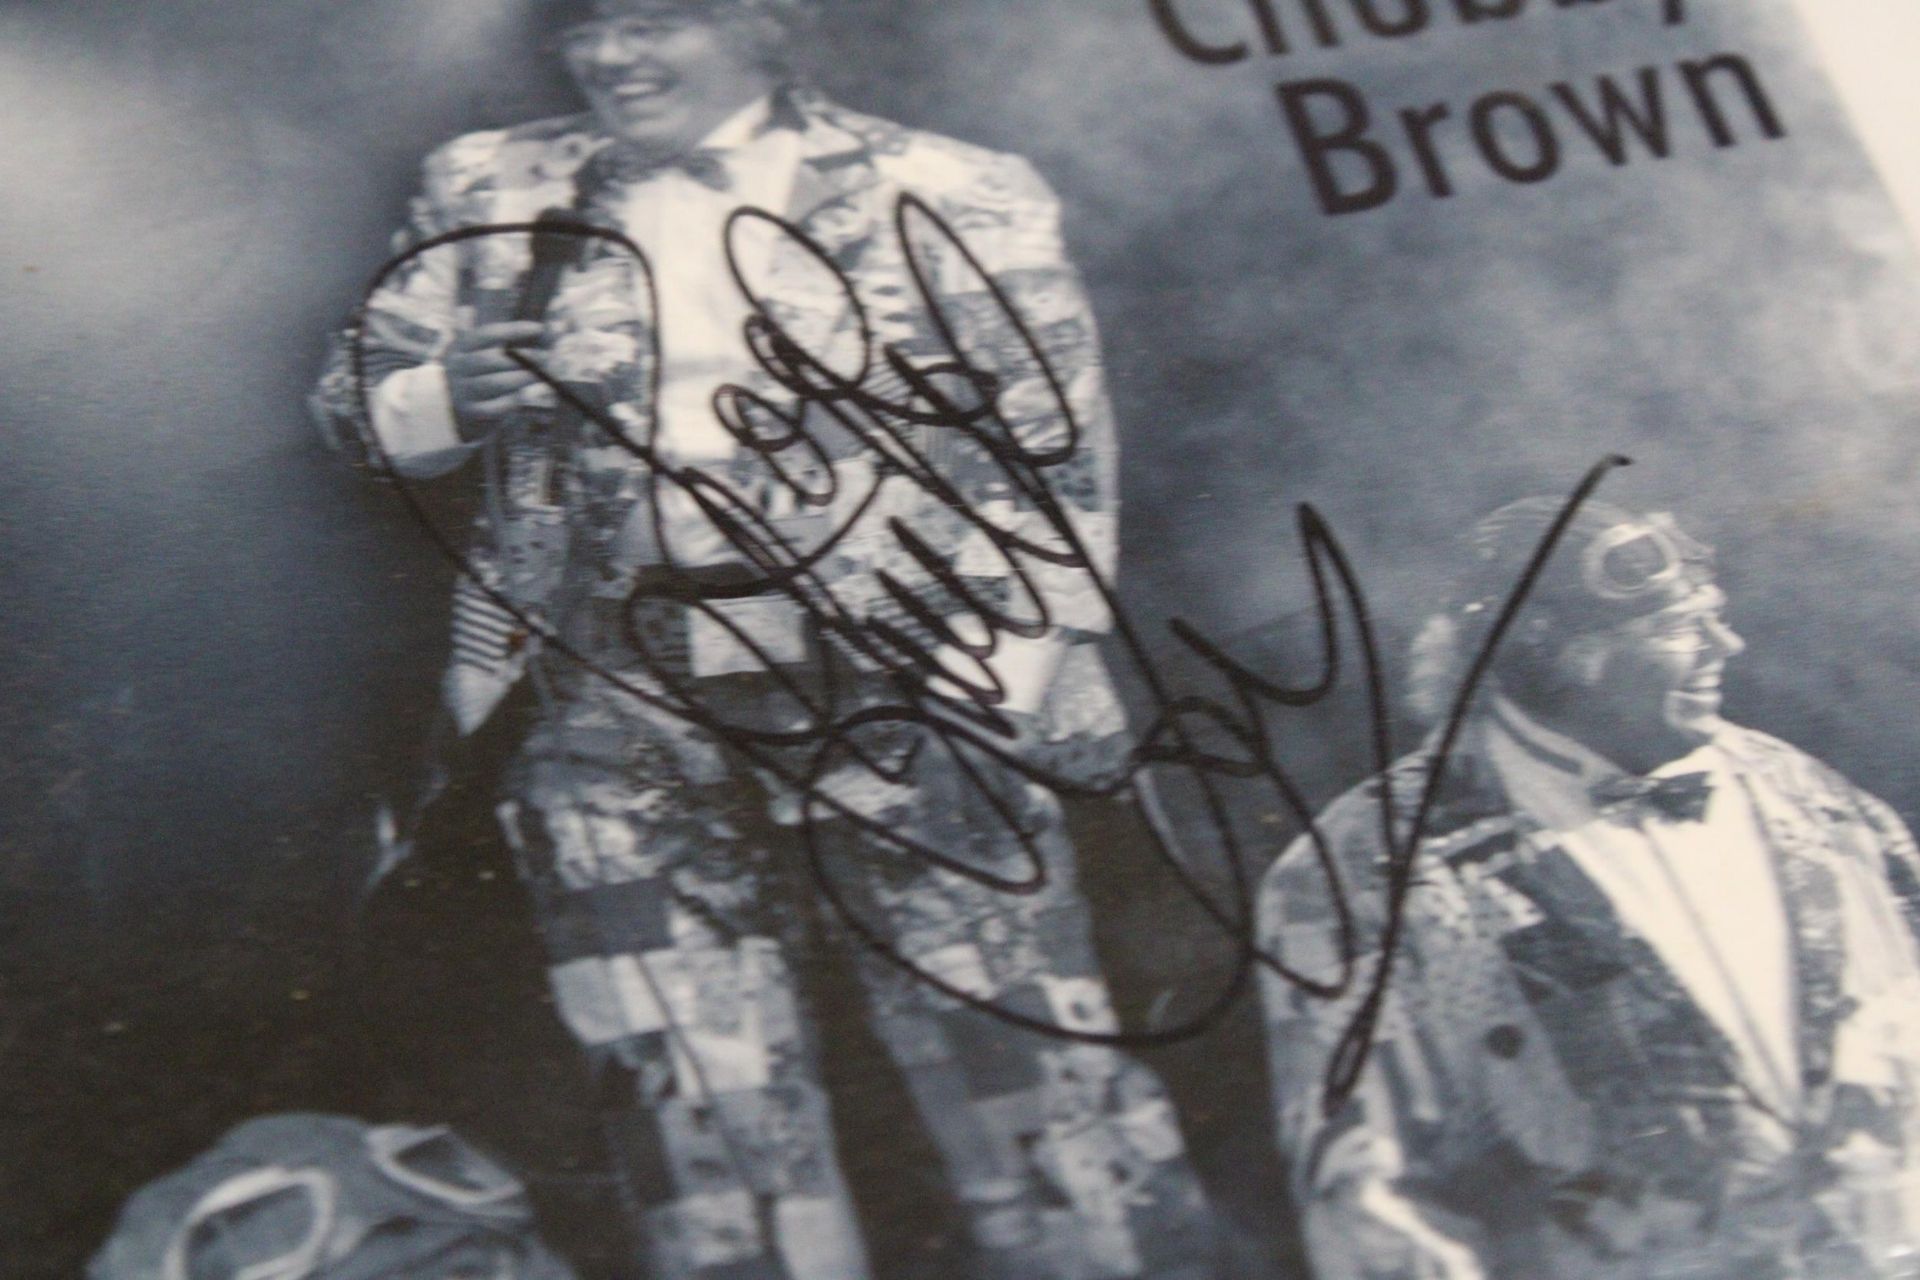 A SPECIAL DOUBLE COLLECTORS EDITION DVD OF THE BEST OF ROY CHUBBY BROWN, SIGNED TO THE FRONT - Image 3 of 4